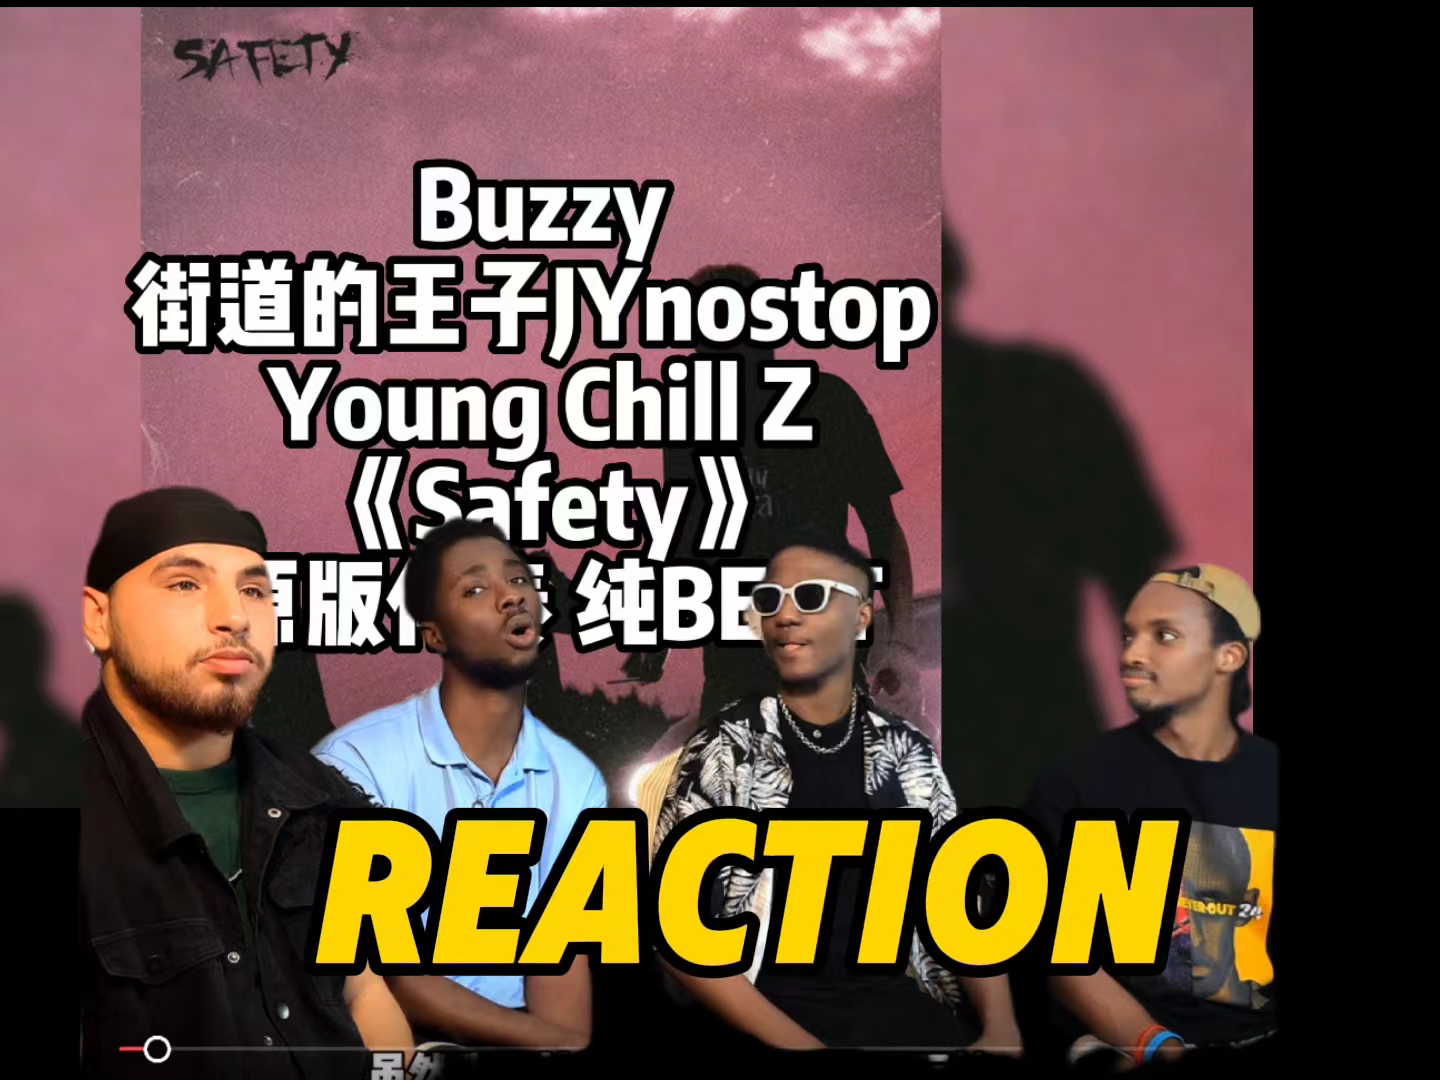 Buzzy八賊/JYnoStop/Young Chill Z新专上线！老外听同名单曲《Safety》“Get rich Get money”